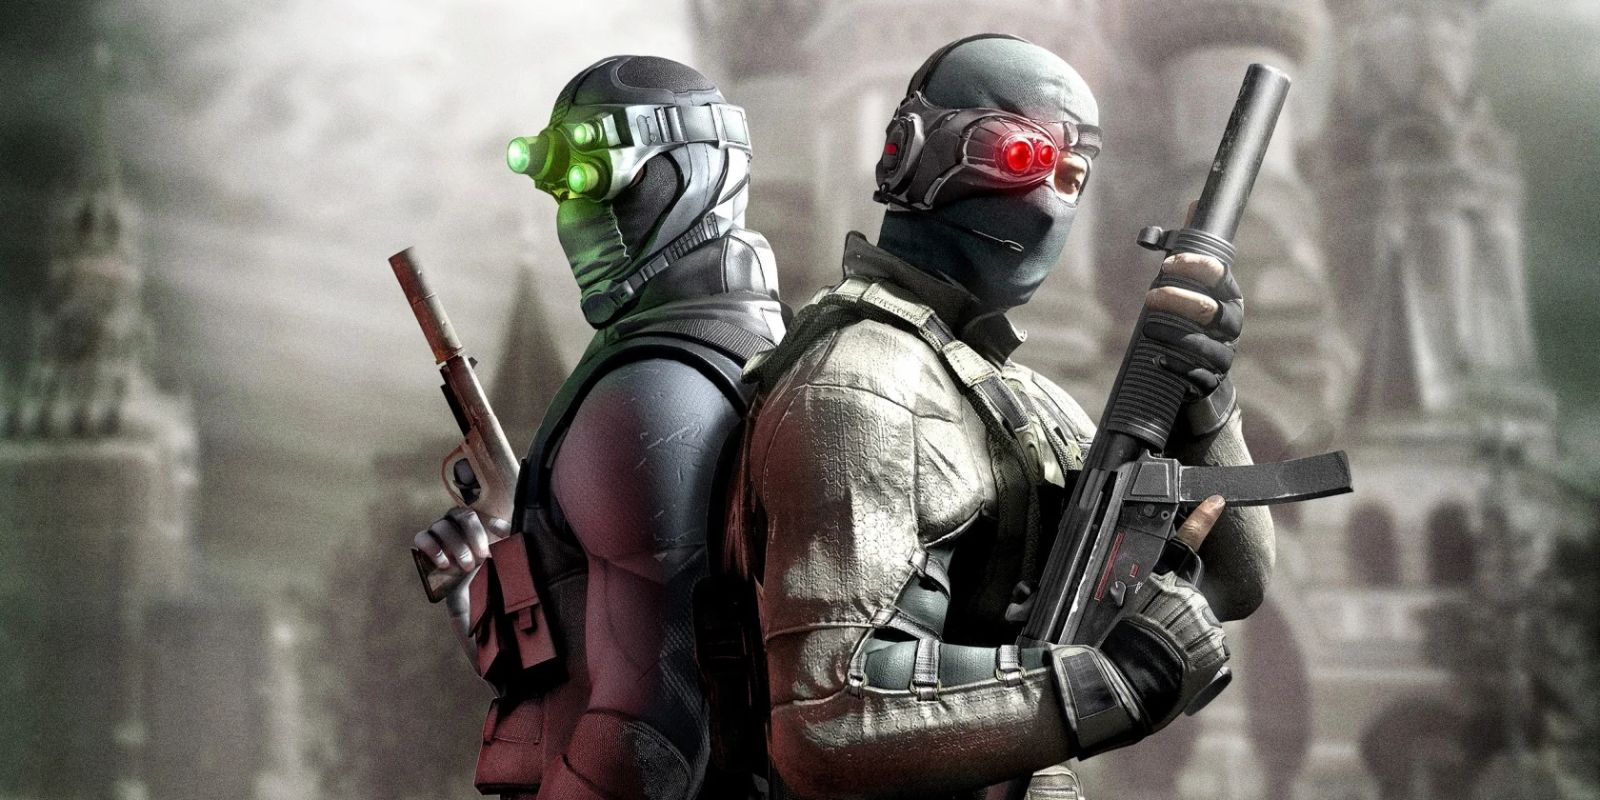 Splinter Cell: Blacklist's asymmetrical multiplayer was well-balanced and ahead of its time.